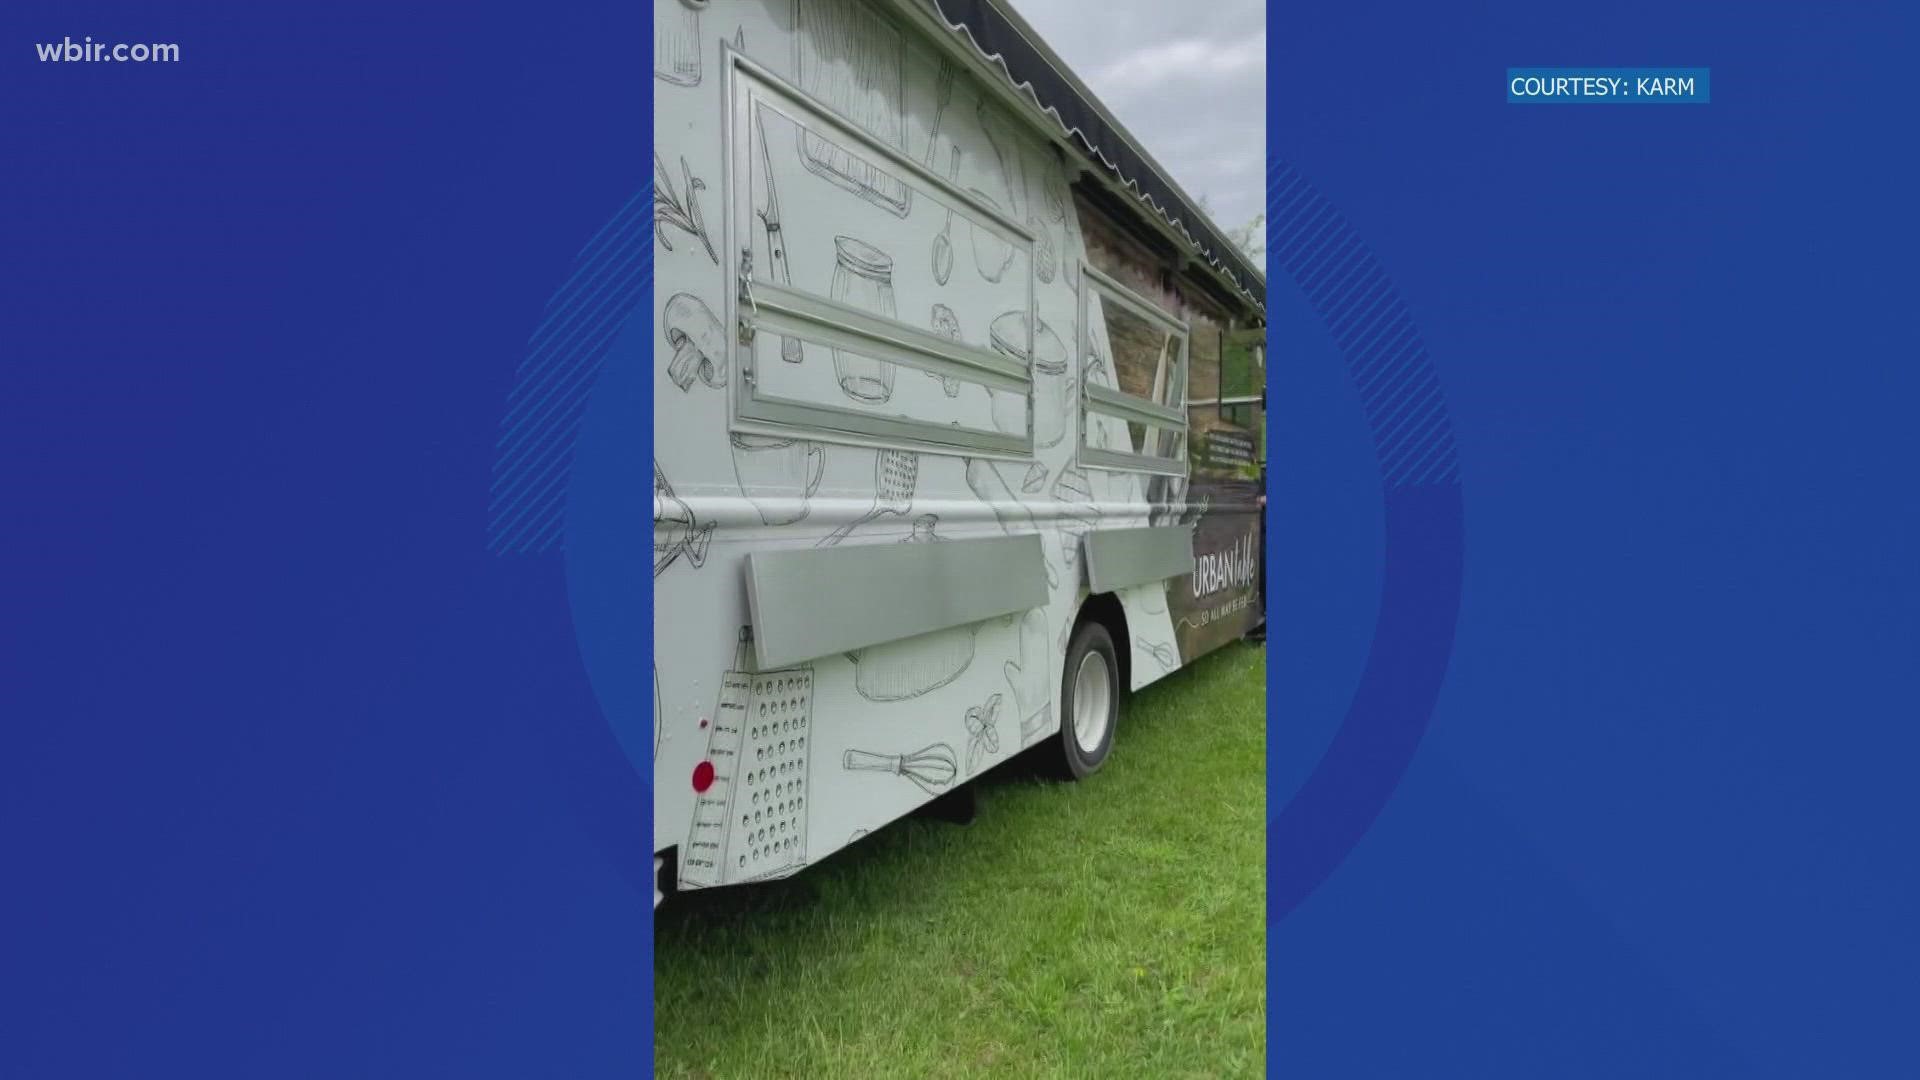 Officials said that the food truck is a part of the mission of Knox Area Rescue Ministries.